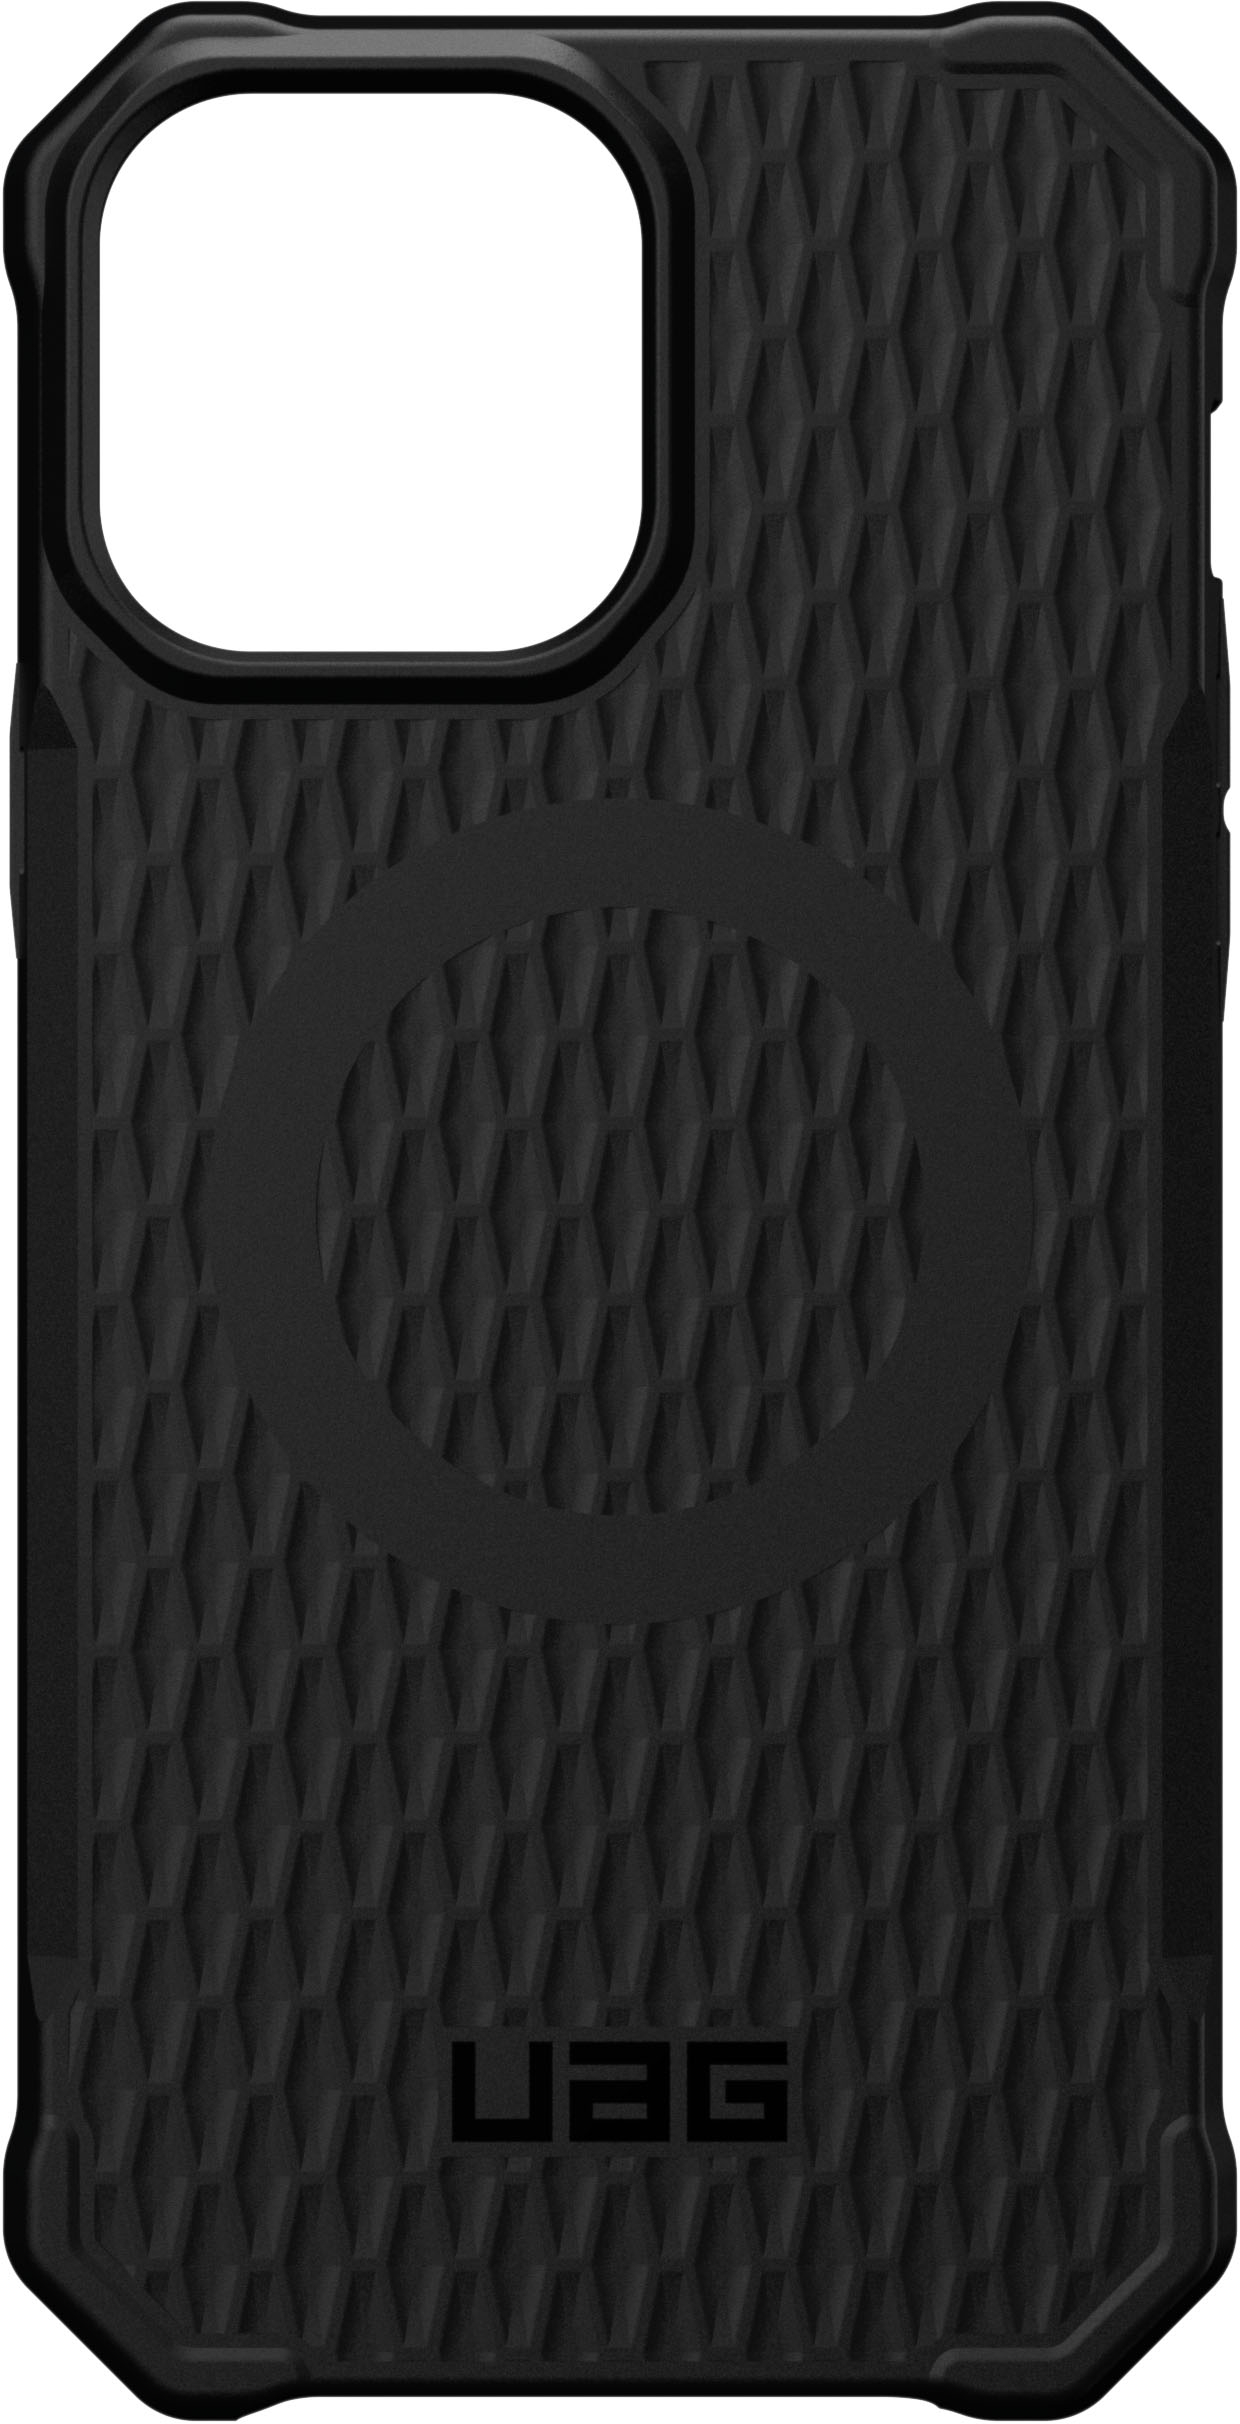 Angle View: UAG - Civilian Series Hard shell Case for iPhone 12 Pro Max - Eggplant